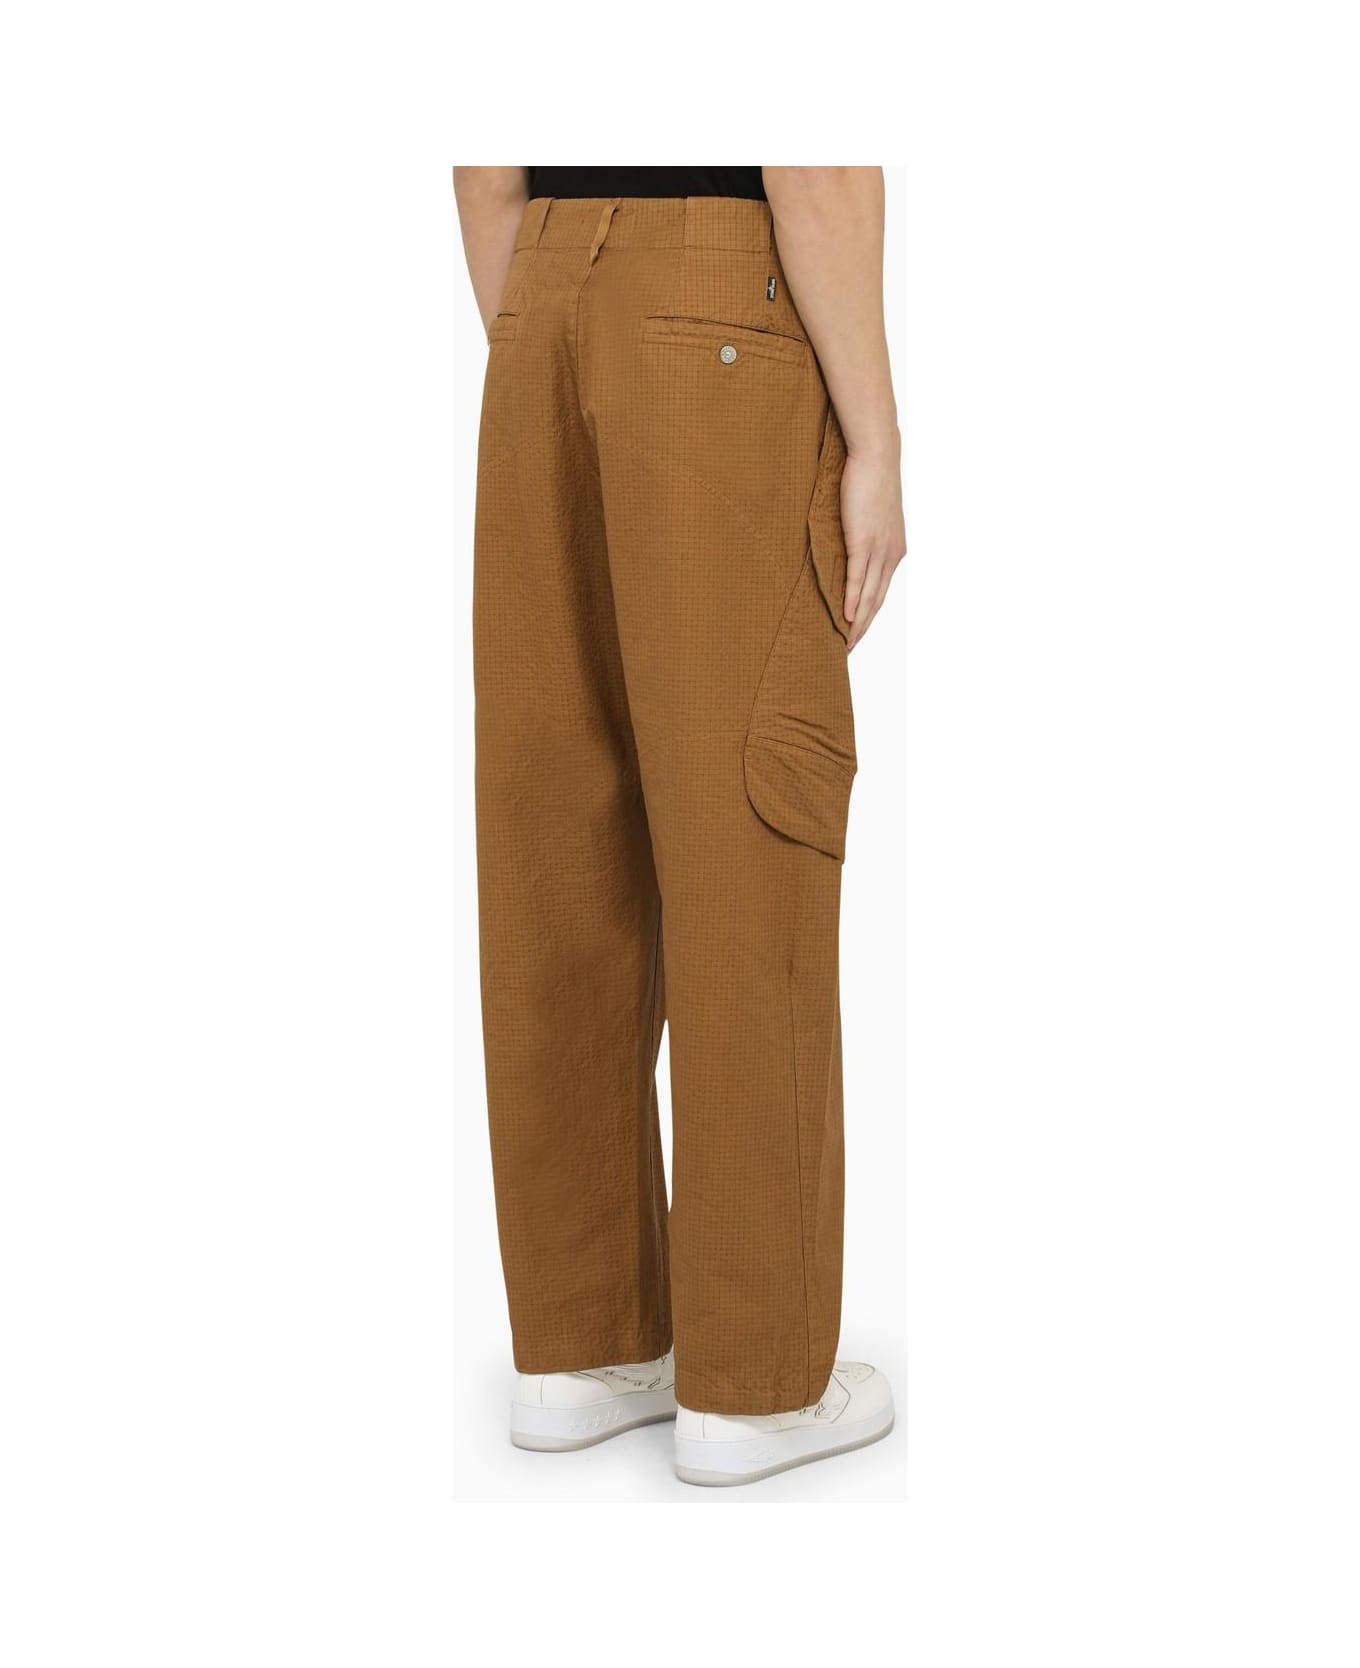 Stone Island Shadow Project Tobacco Cargo Trousers - Tobacco ボトムス